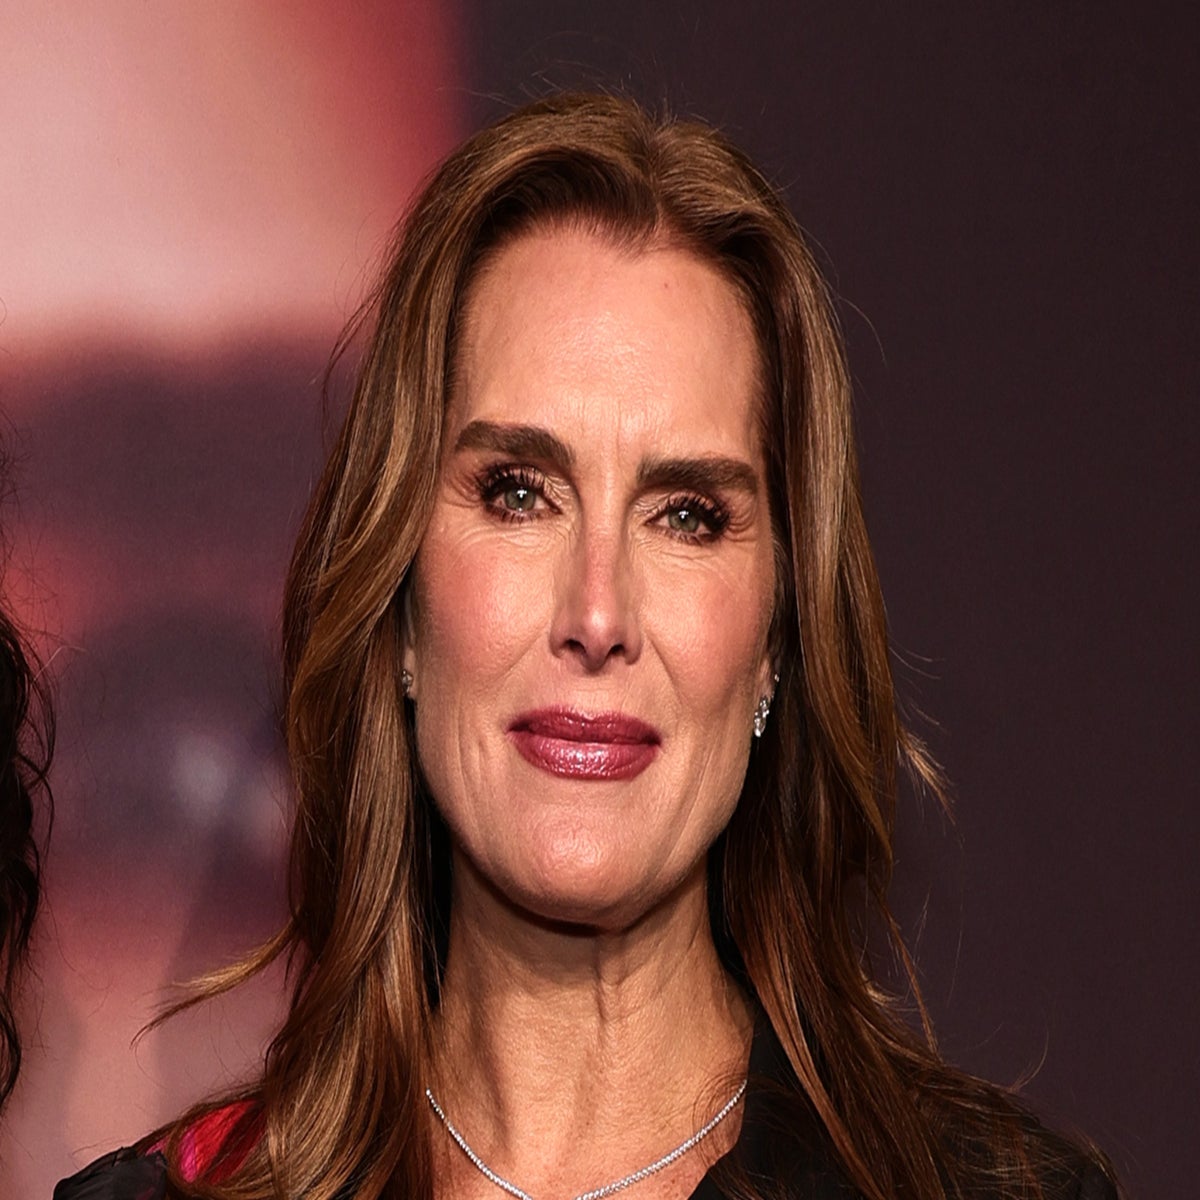 Old Man Beautiful Dirocter Sex - Brooke Shields says her first kiss was with a 29-year-old man on camera  when she was 11 | The Independent